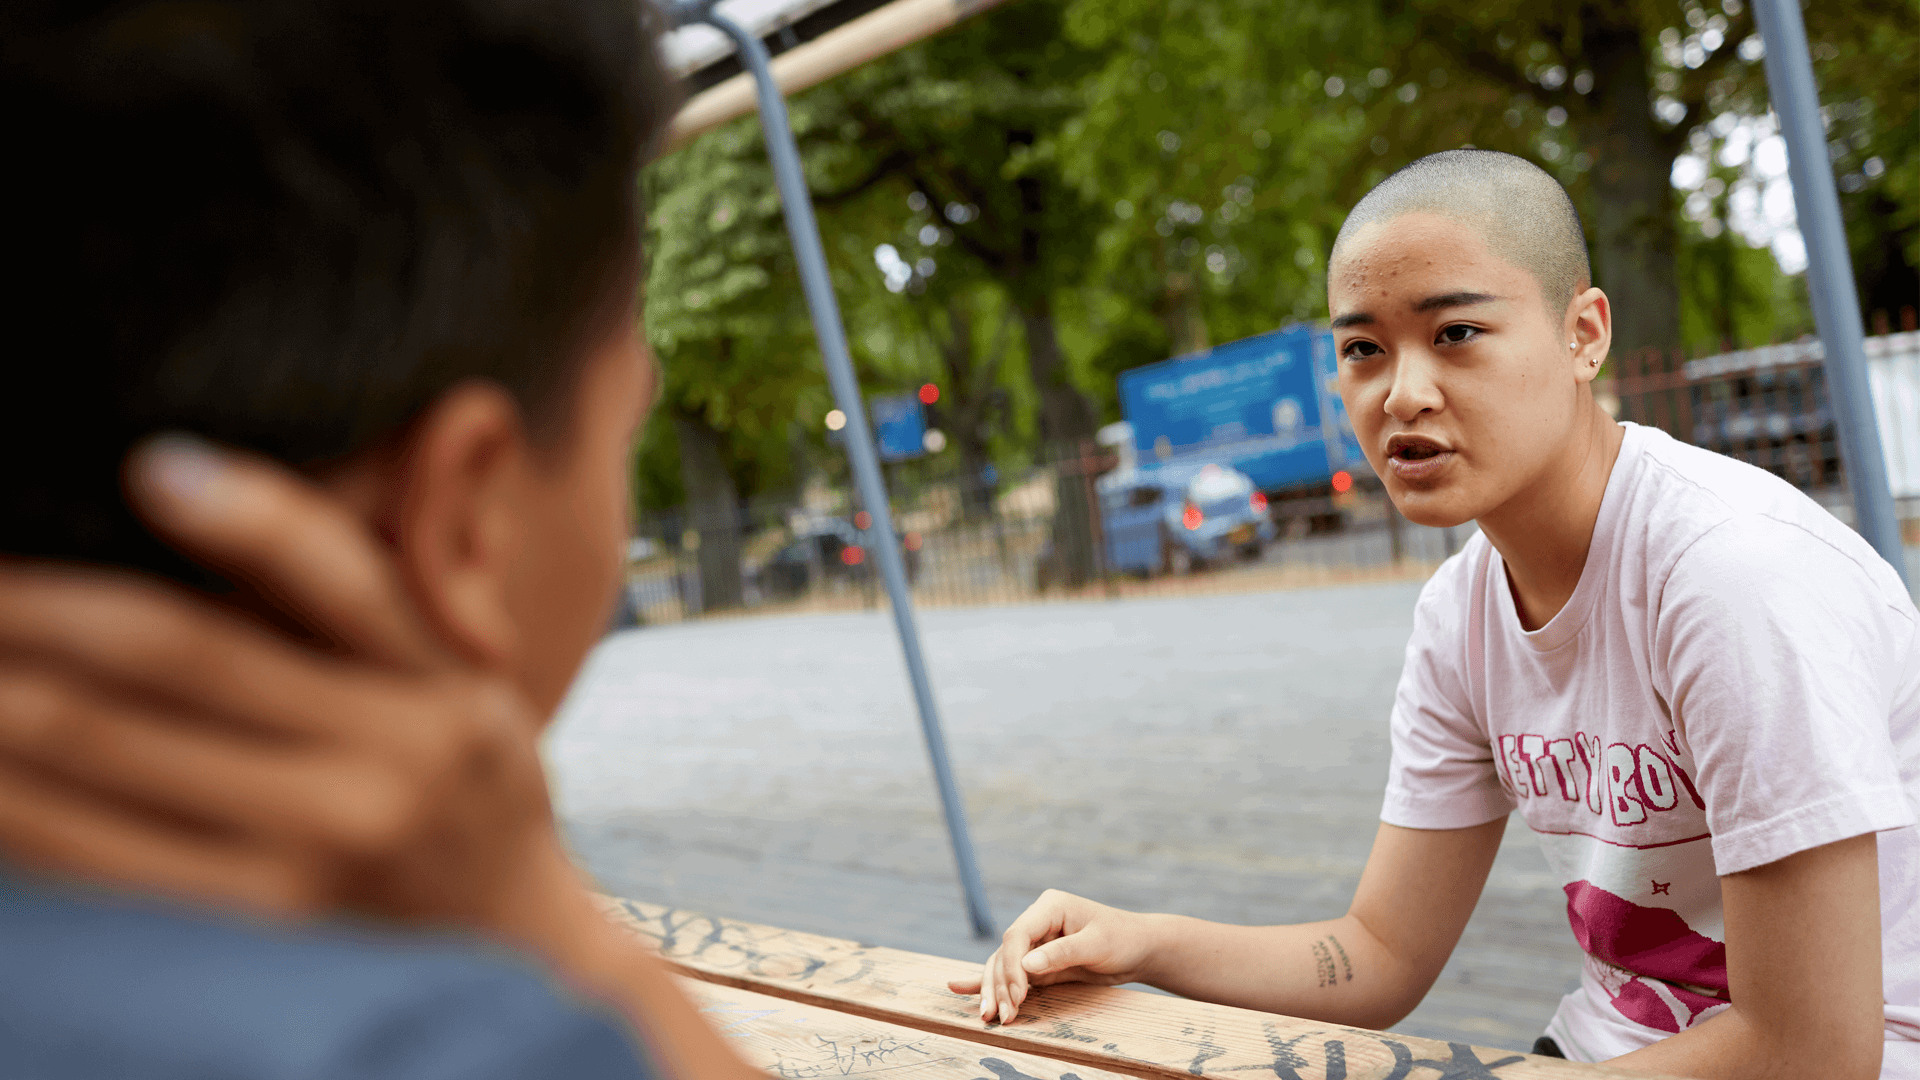 girl with a shaved head wearing white shirt explaining to a friend in front of her while sitting on a dining bench with a busy street on the background